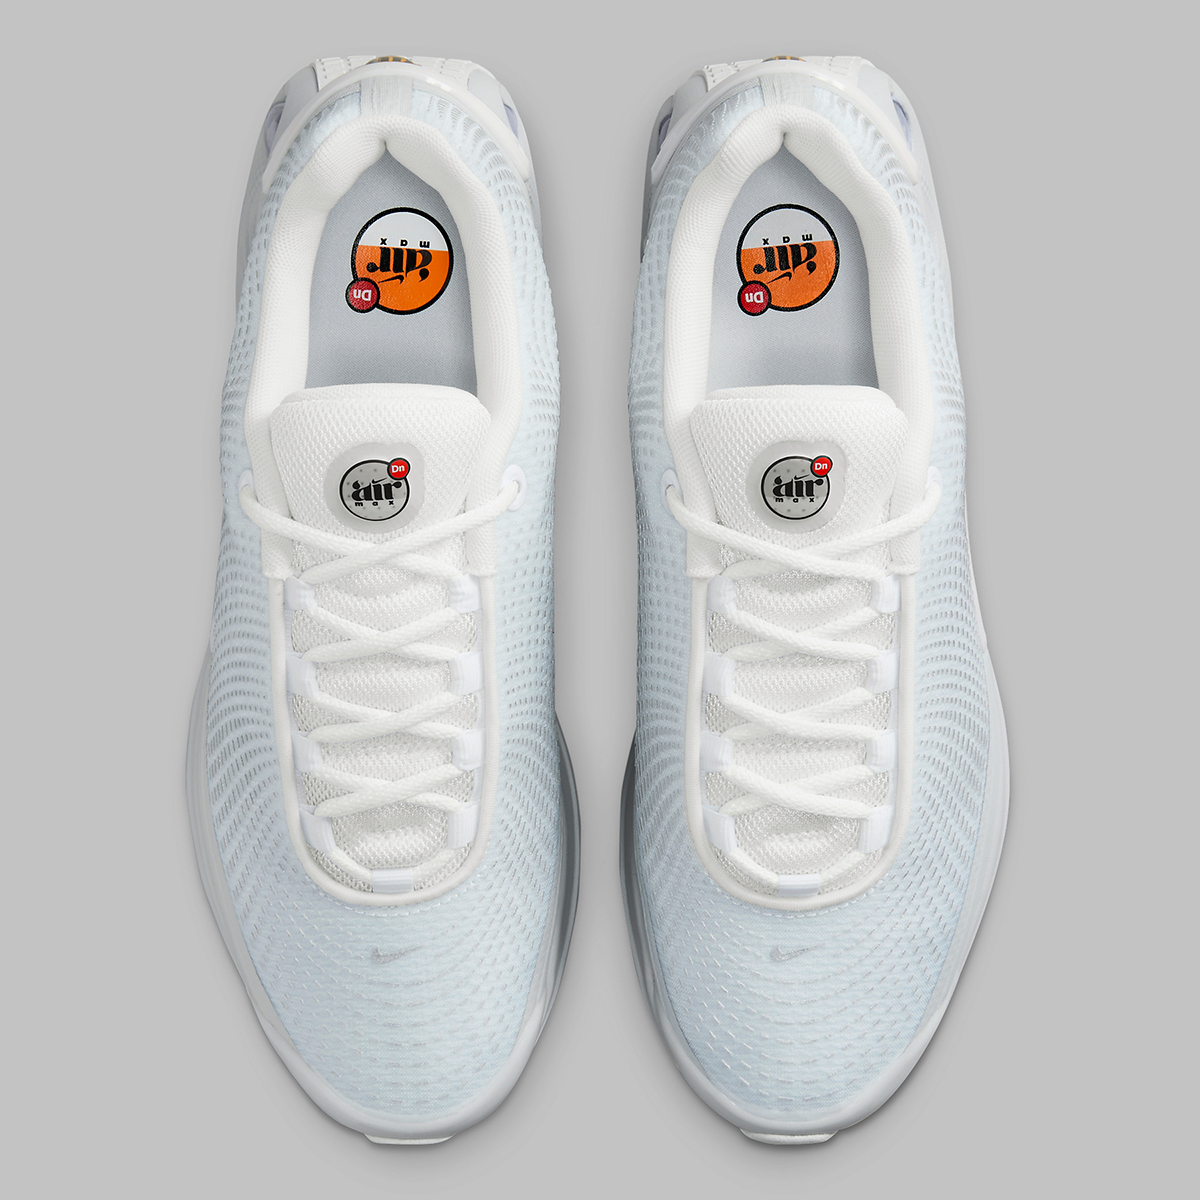 Official Retailer Images Of The Nike Air Max Dn "White/Silver